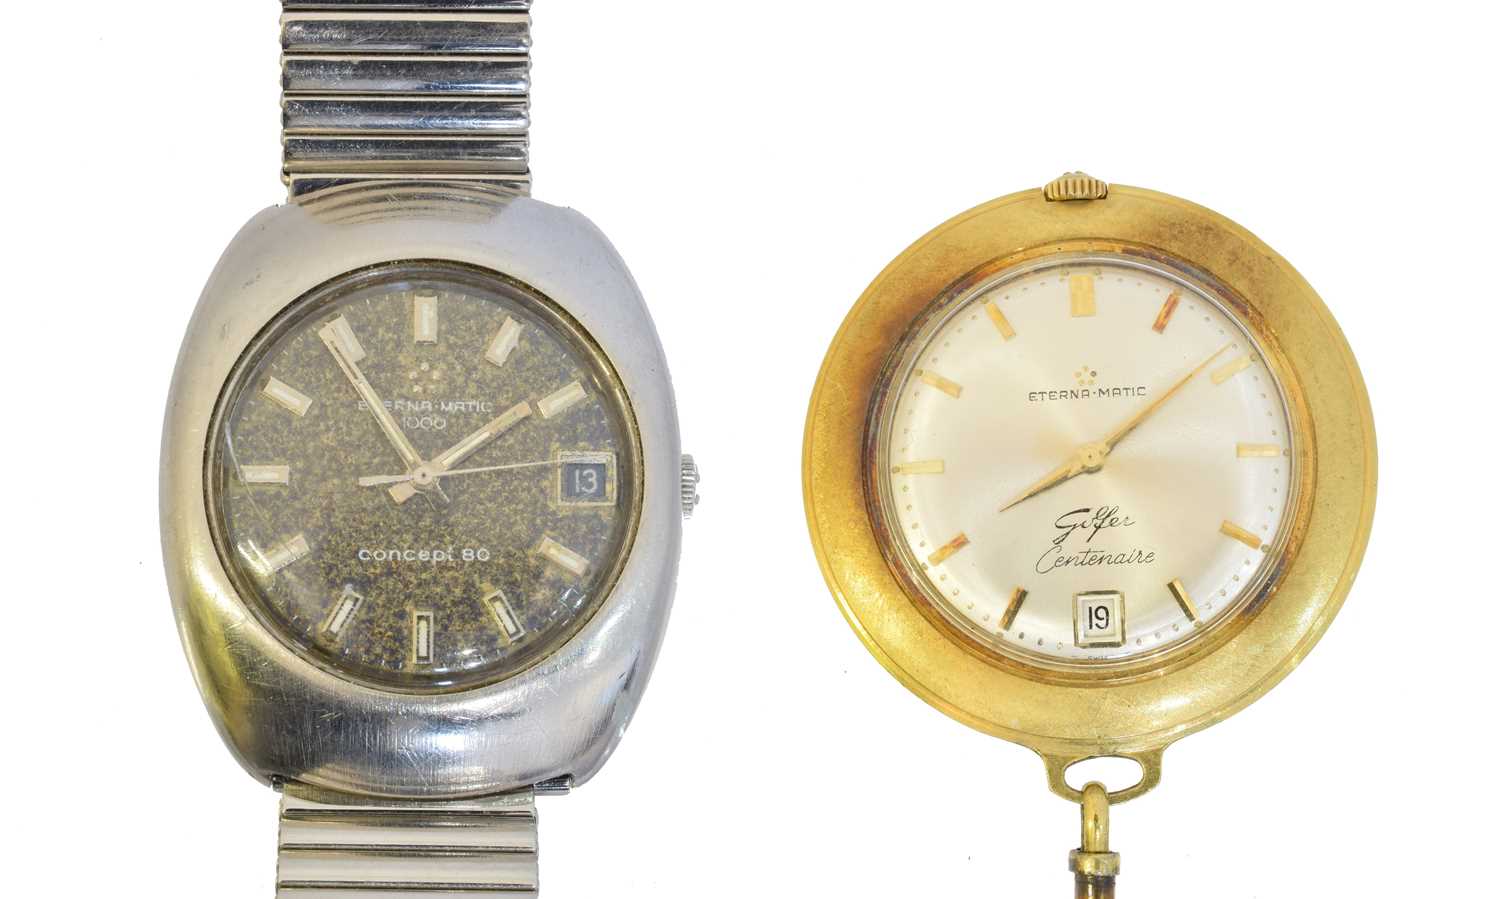 Lot 51 - Two Eterna-Matic watches